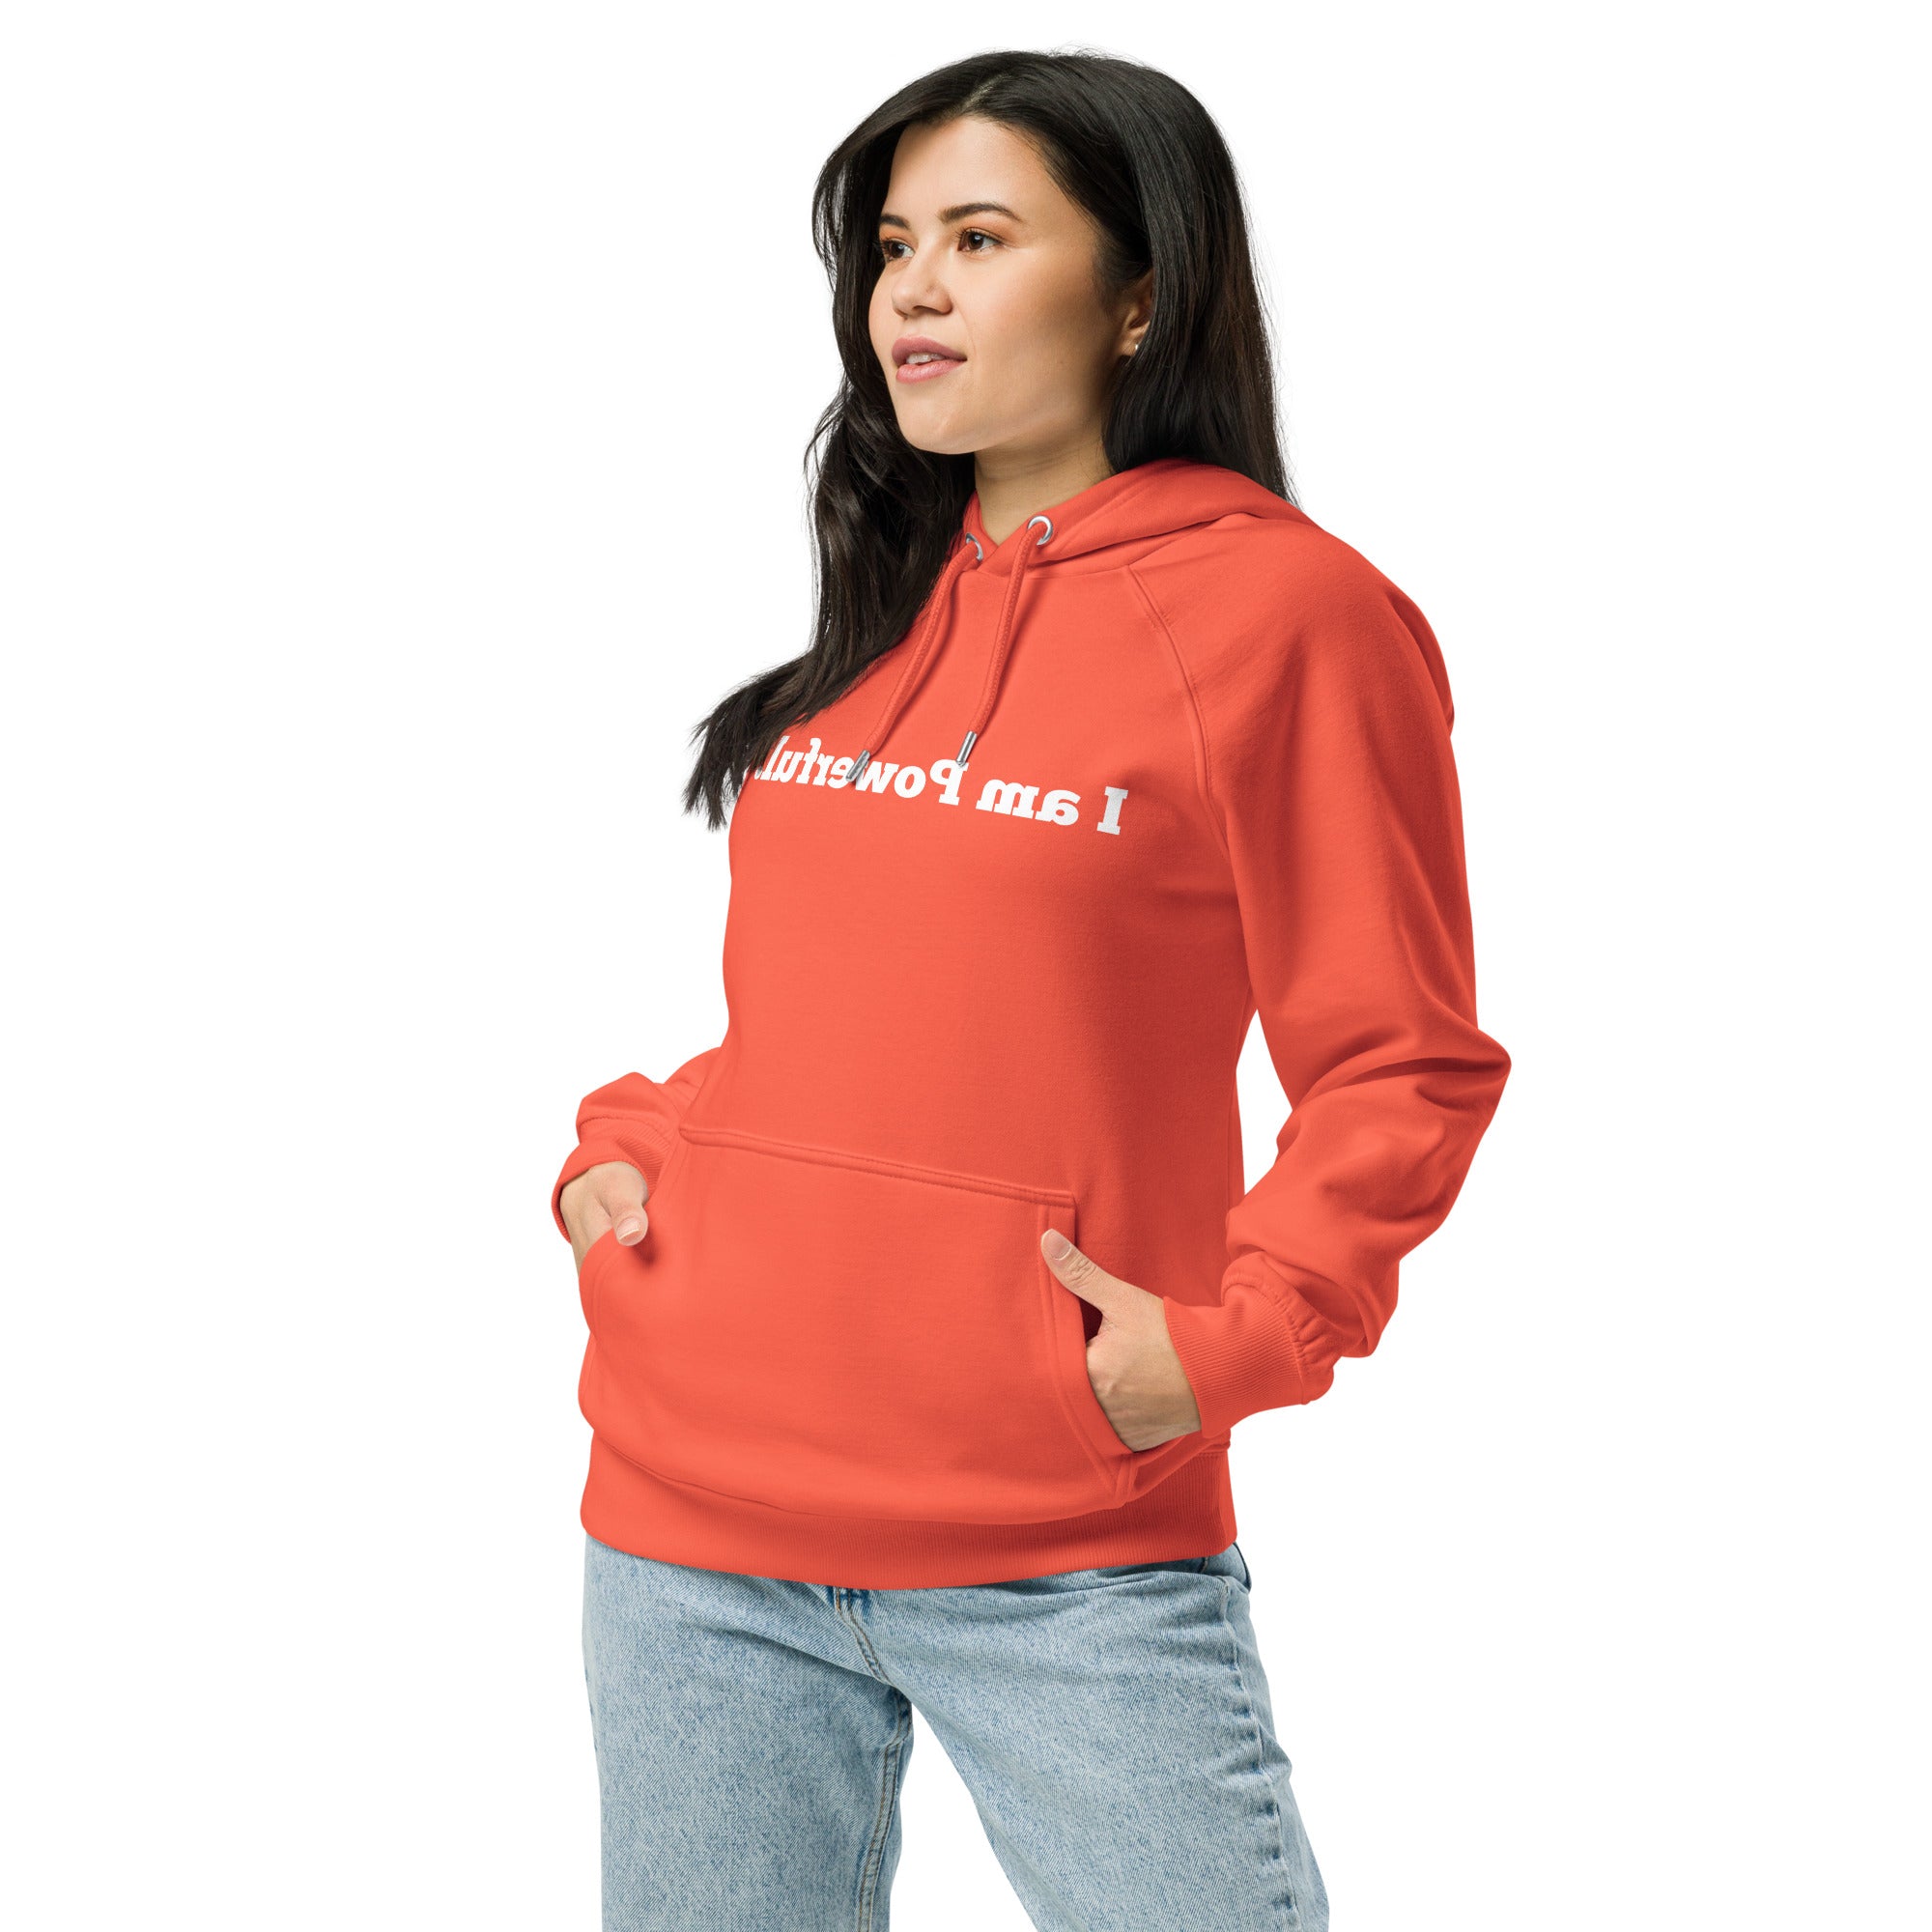 I AM POWERFUL Mirror Affirmation Hoodie (SLIM FIT) - 4 COLORS!